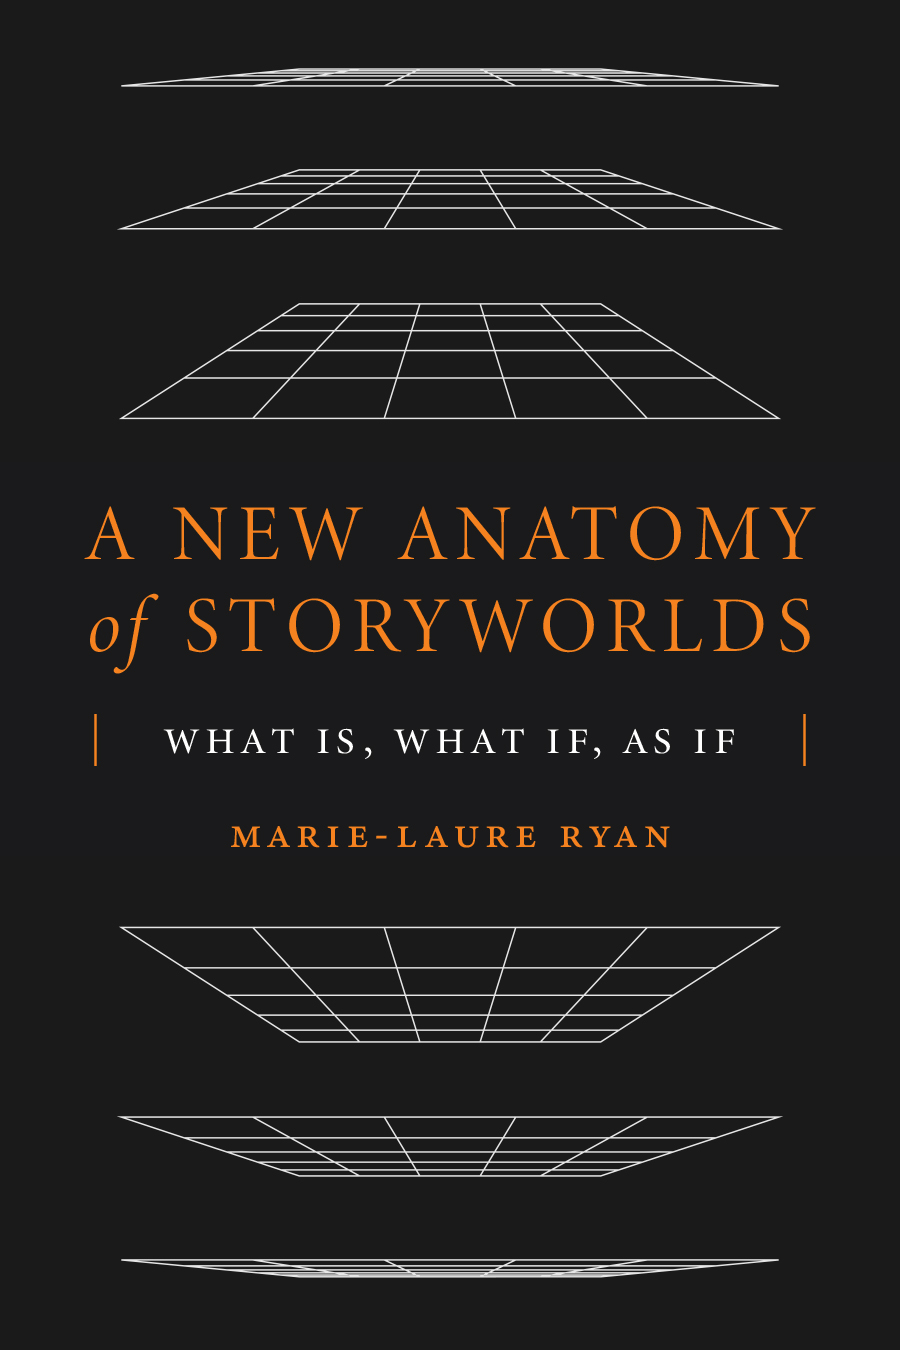 A New Anatomy of Storyworldsbook cover